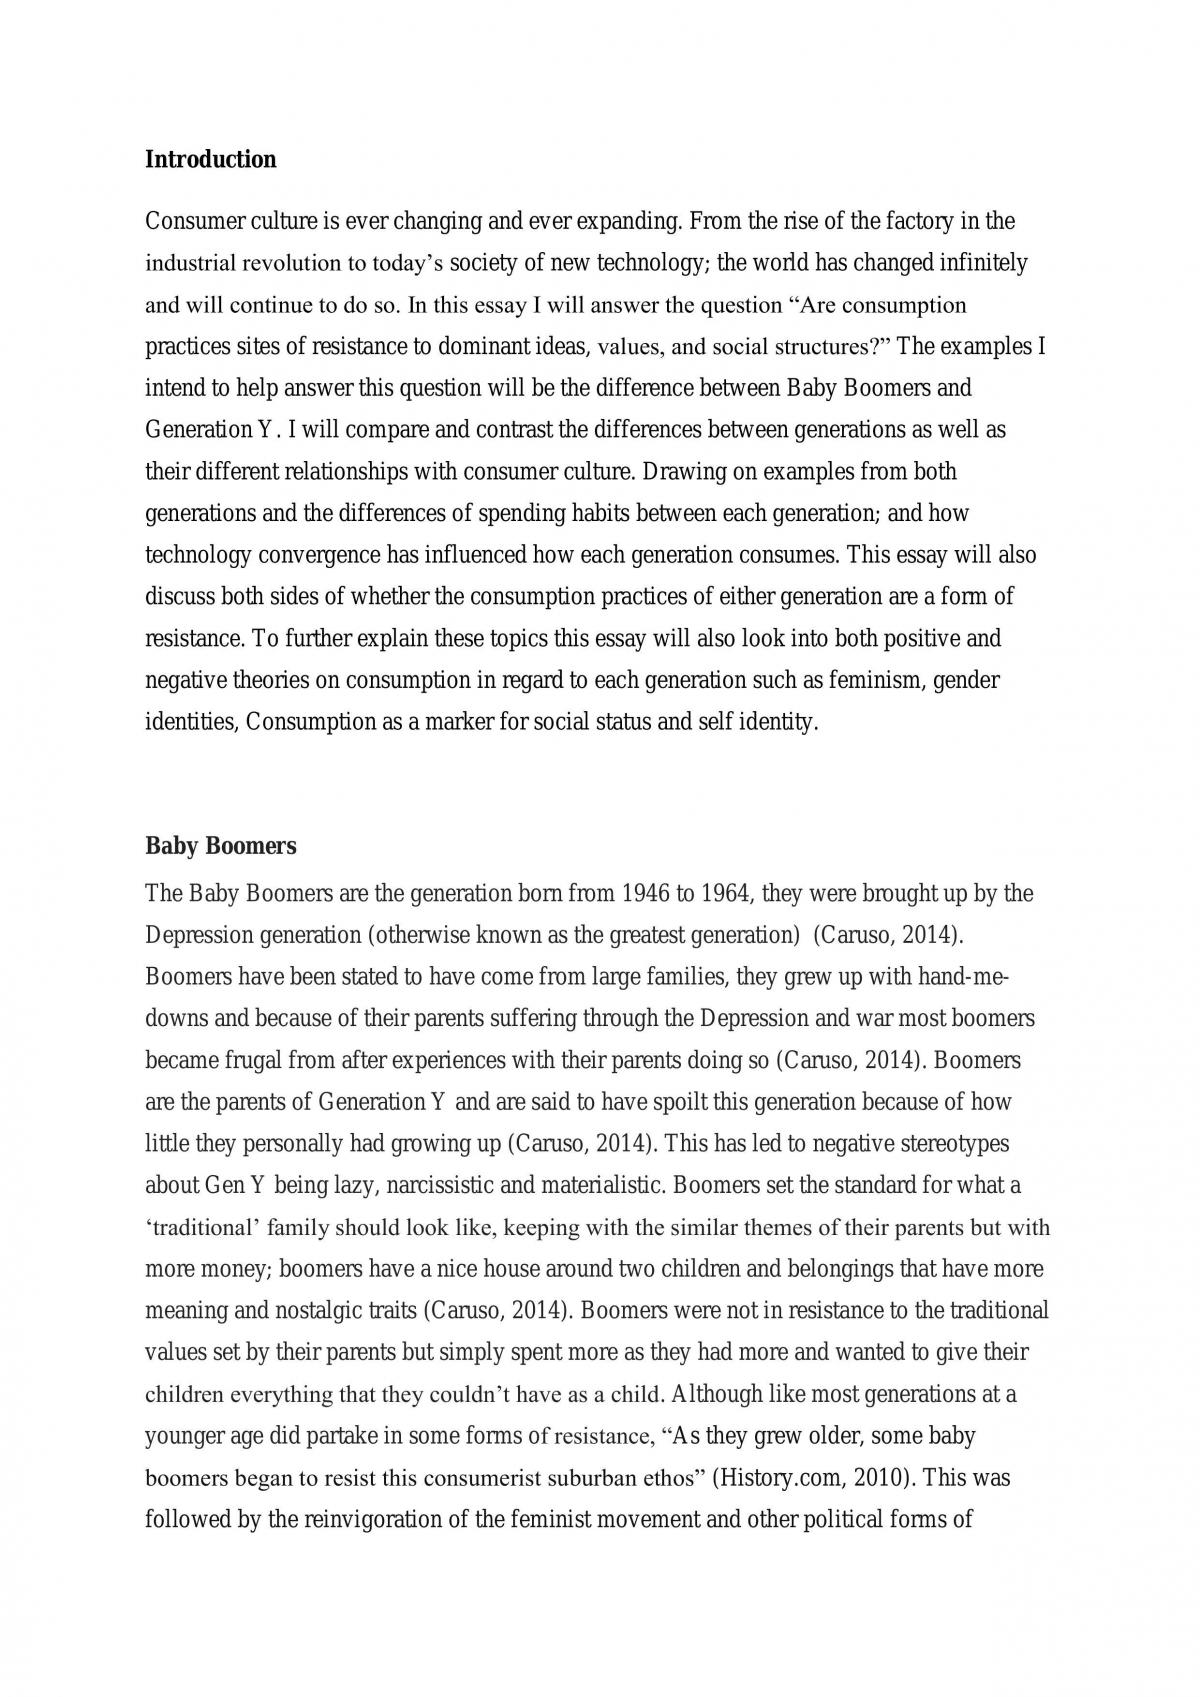 KCB203: Consumption Matters: Consumer Culture and Identities Essay - Page 2